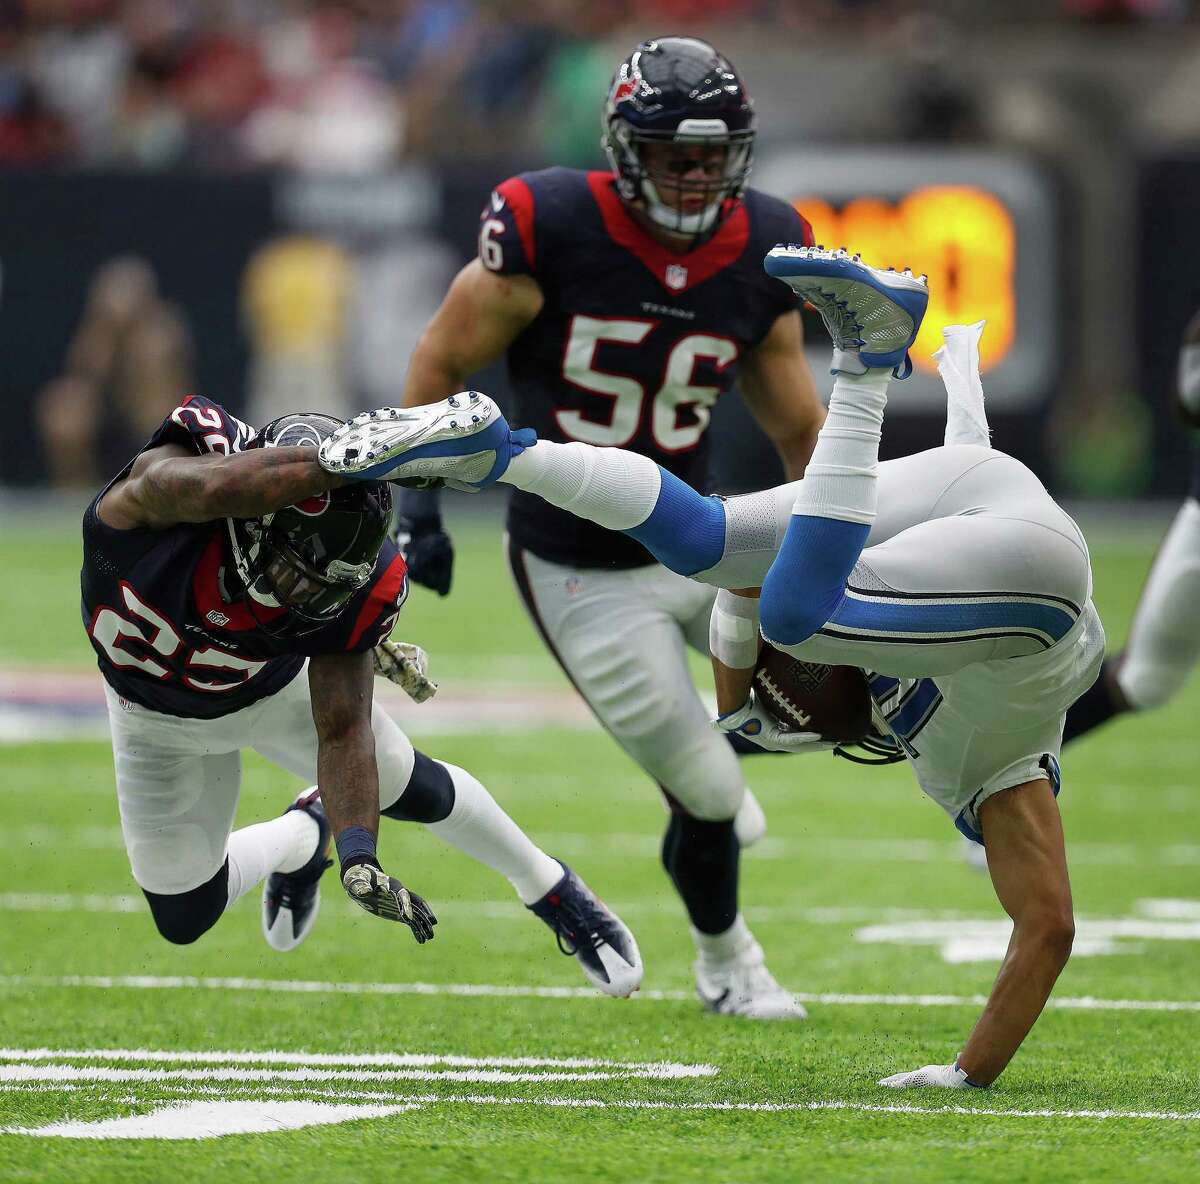 Detroit Lions wide receiver Golden Tate (15) gets upended by Houston Texans cornerback Kareem Jackson (25) during the fourth quarter an NFL football game at NRG Stadium, Sunday,Oct. 30, 2016 in Houston.